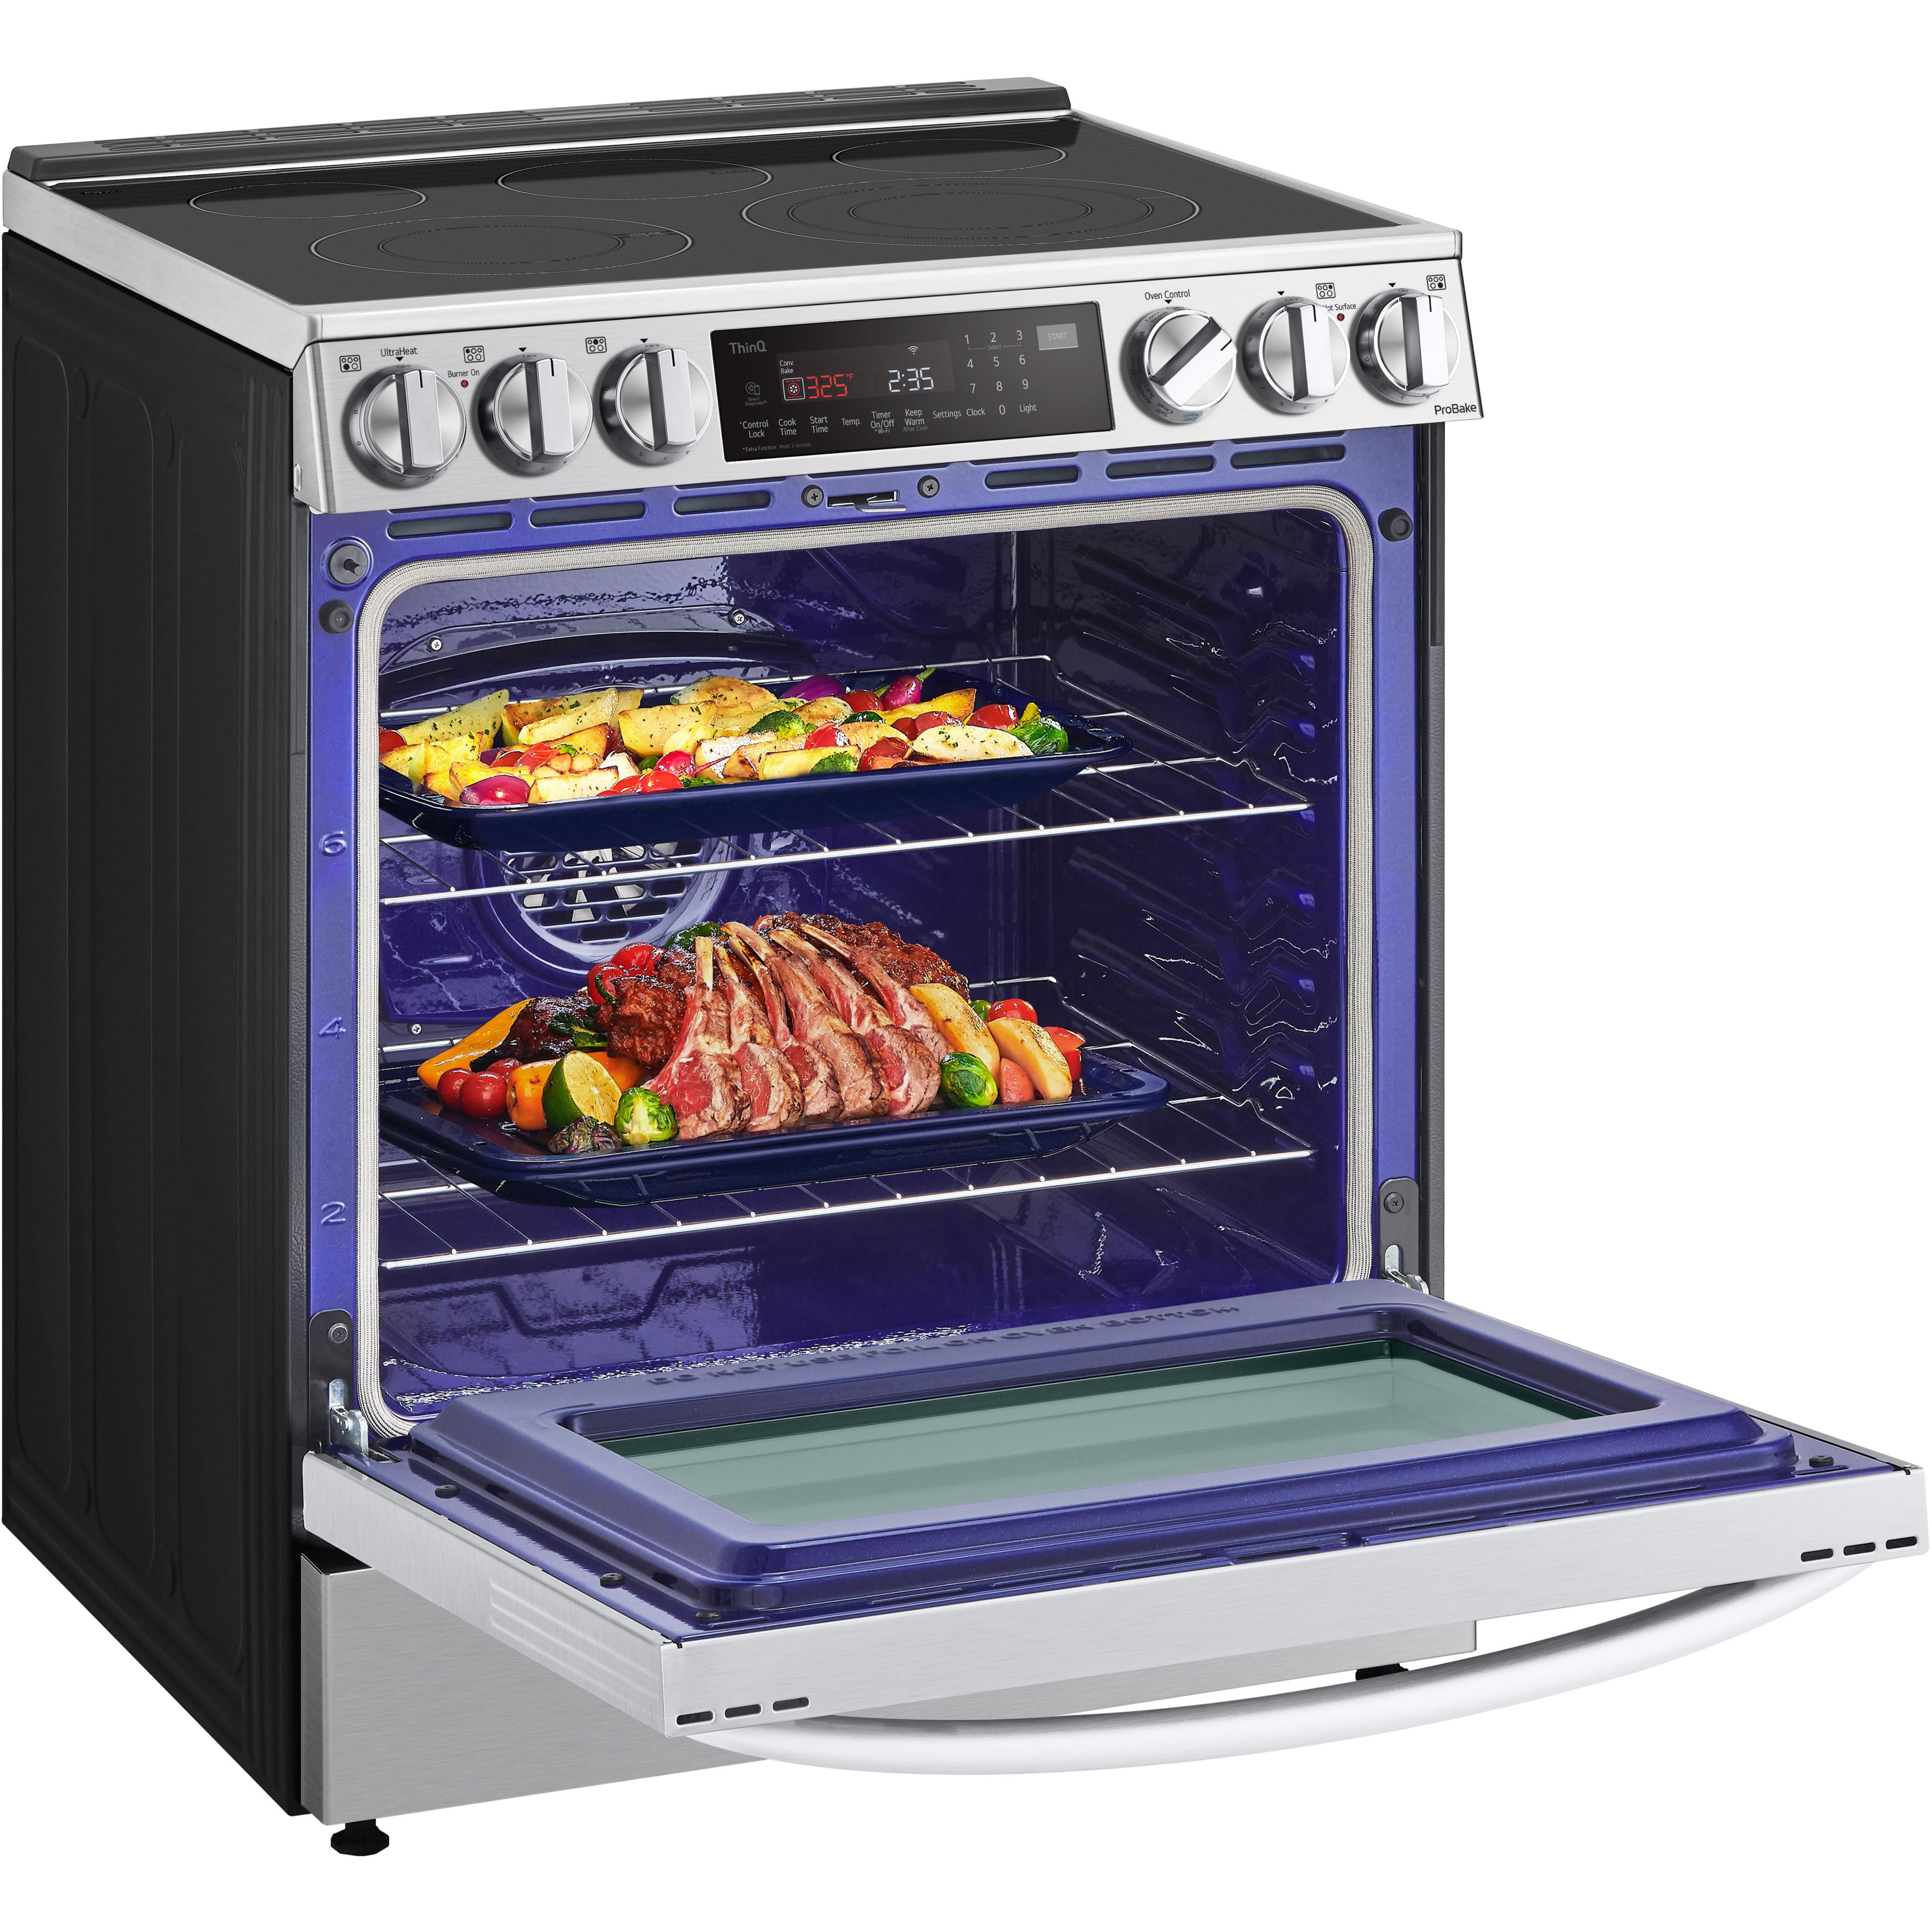 LG 30-inch Slide-In Electric Range with Air Fry LSEL6335F